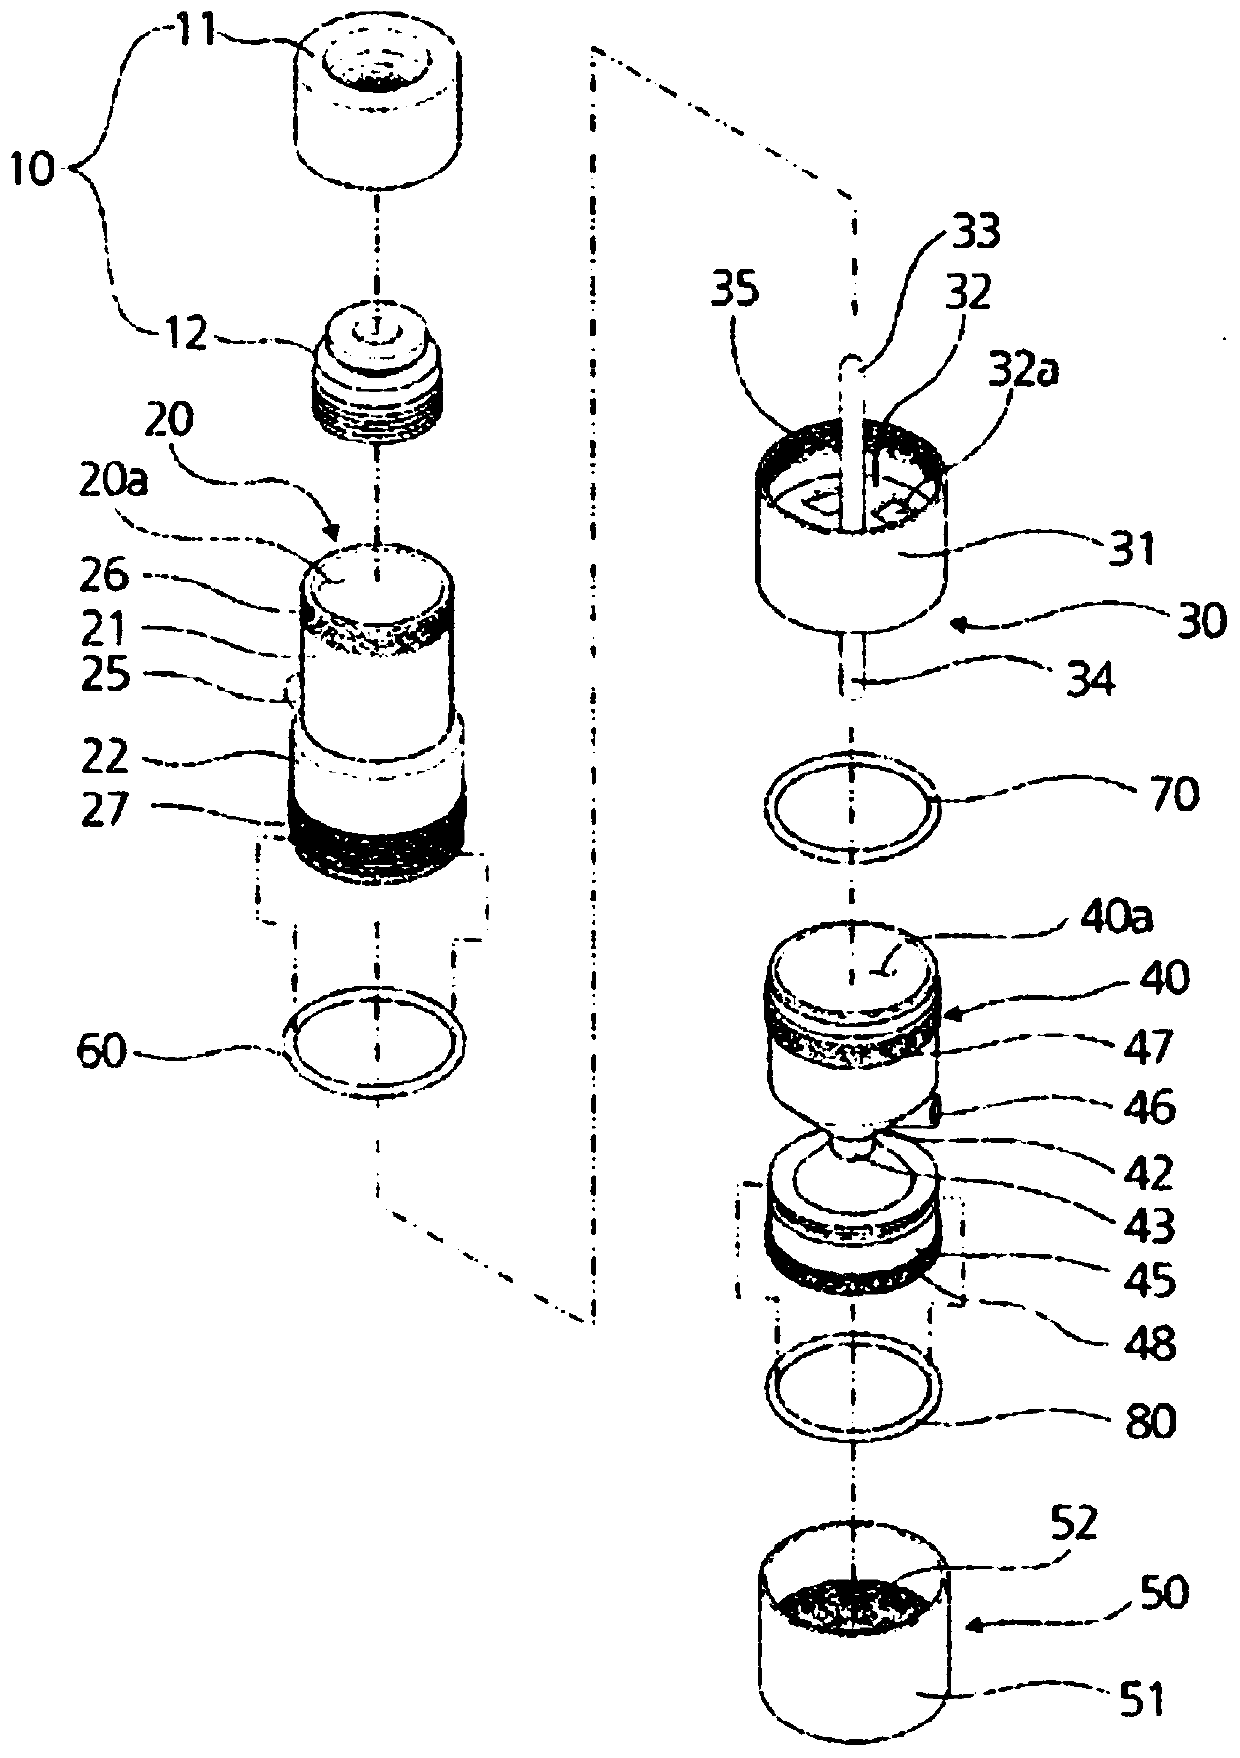 Blood separating device